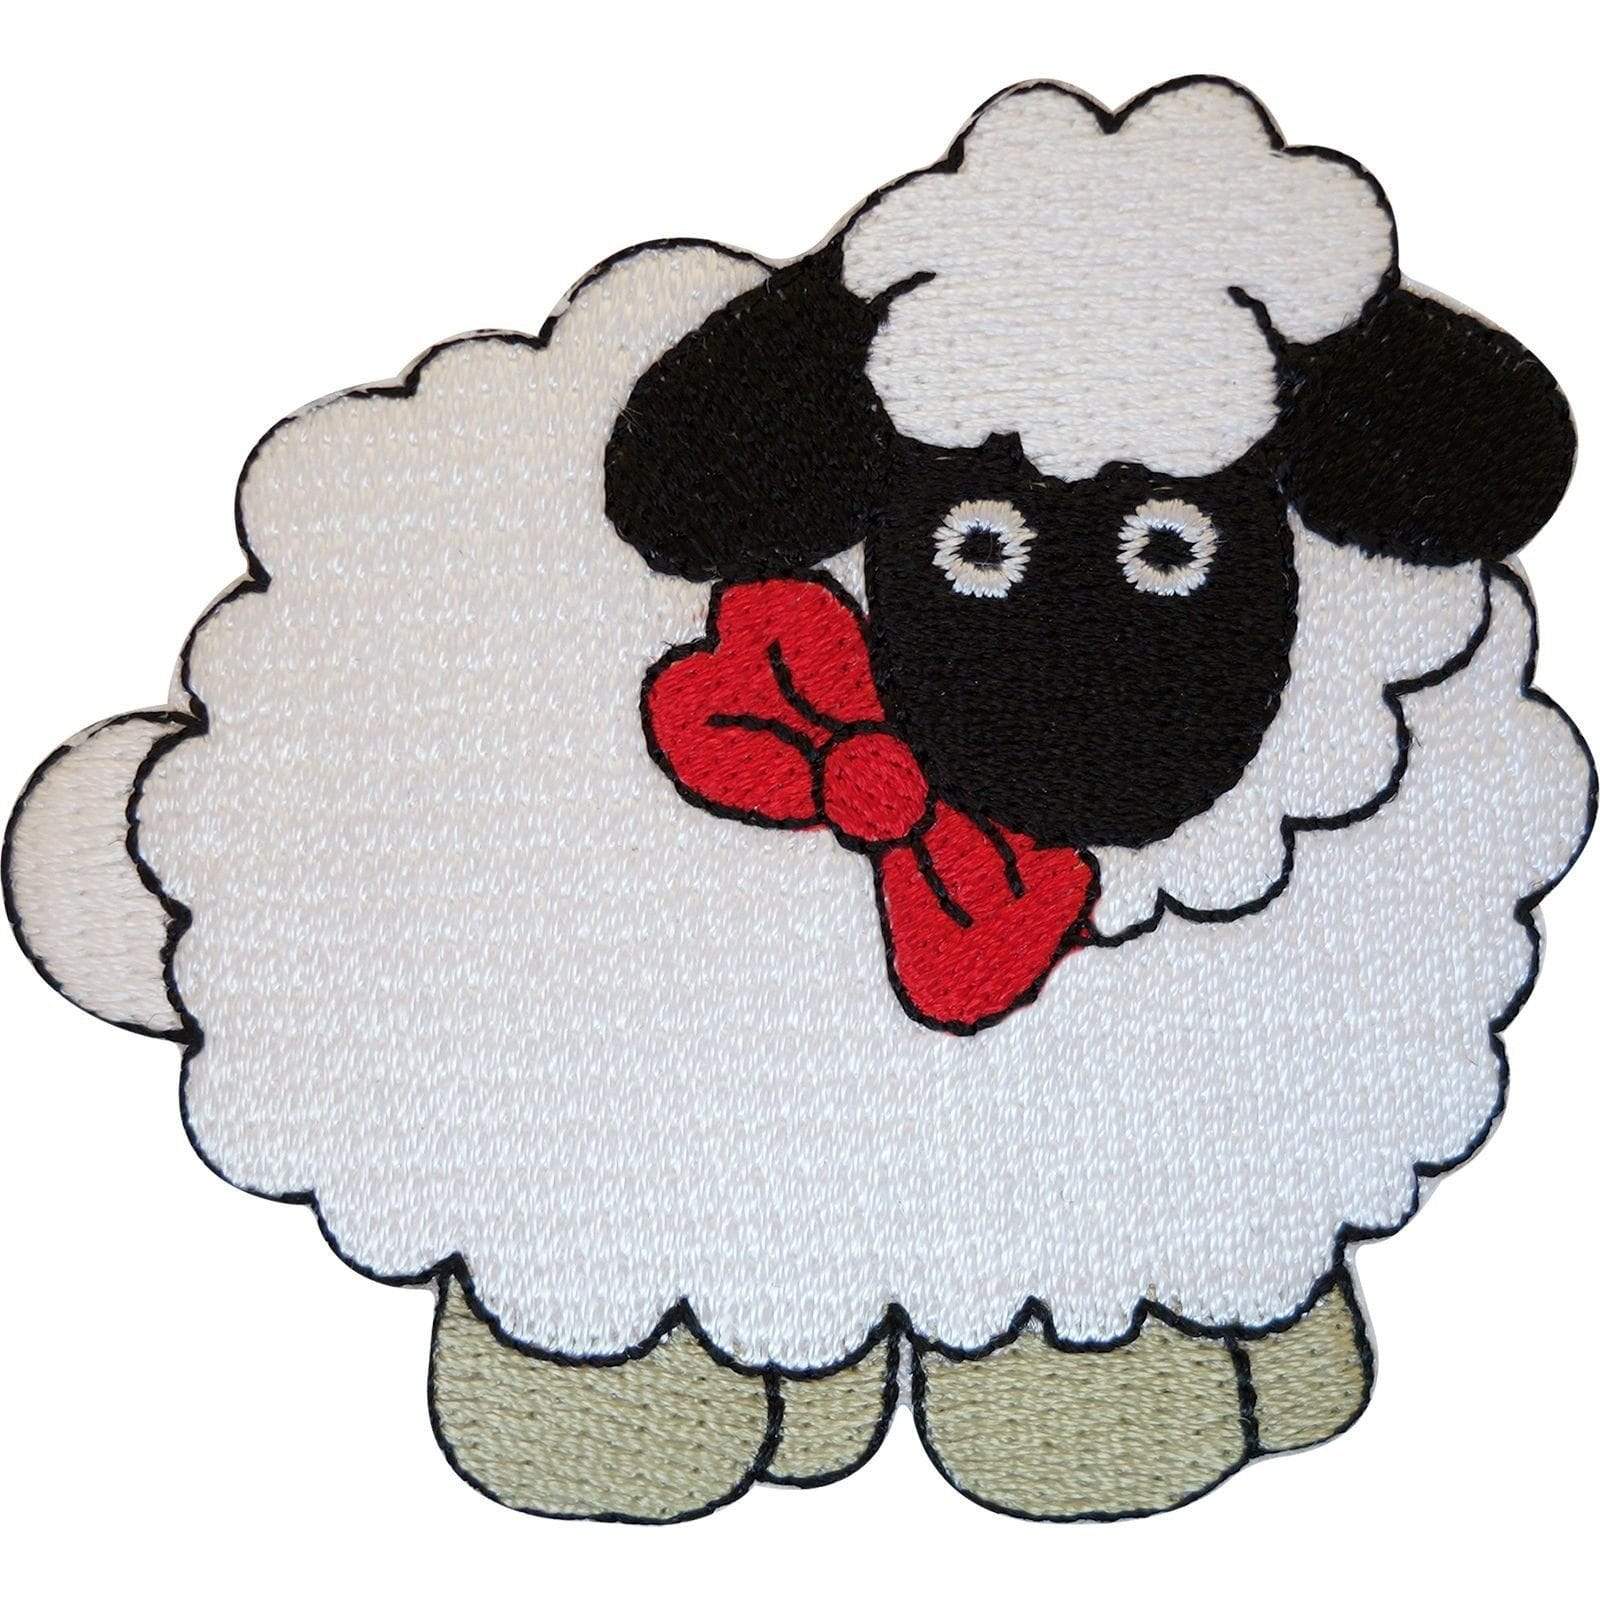 Embroidered Sheep Iron On Badge Sew On Patch Clothing Embroidery Applique Motif